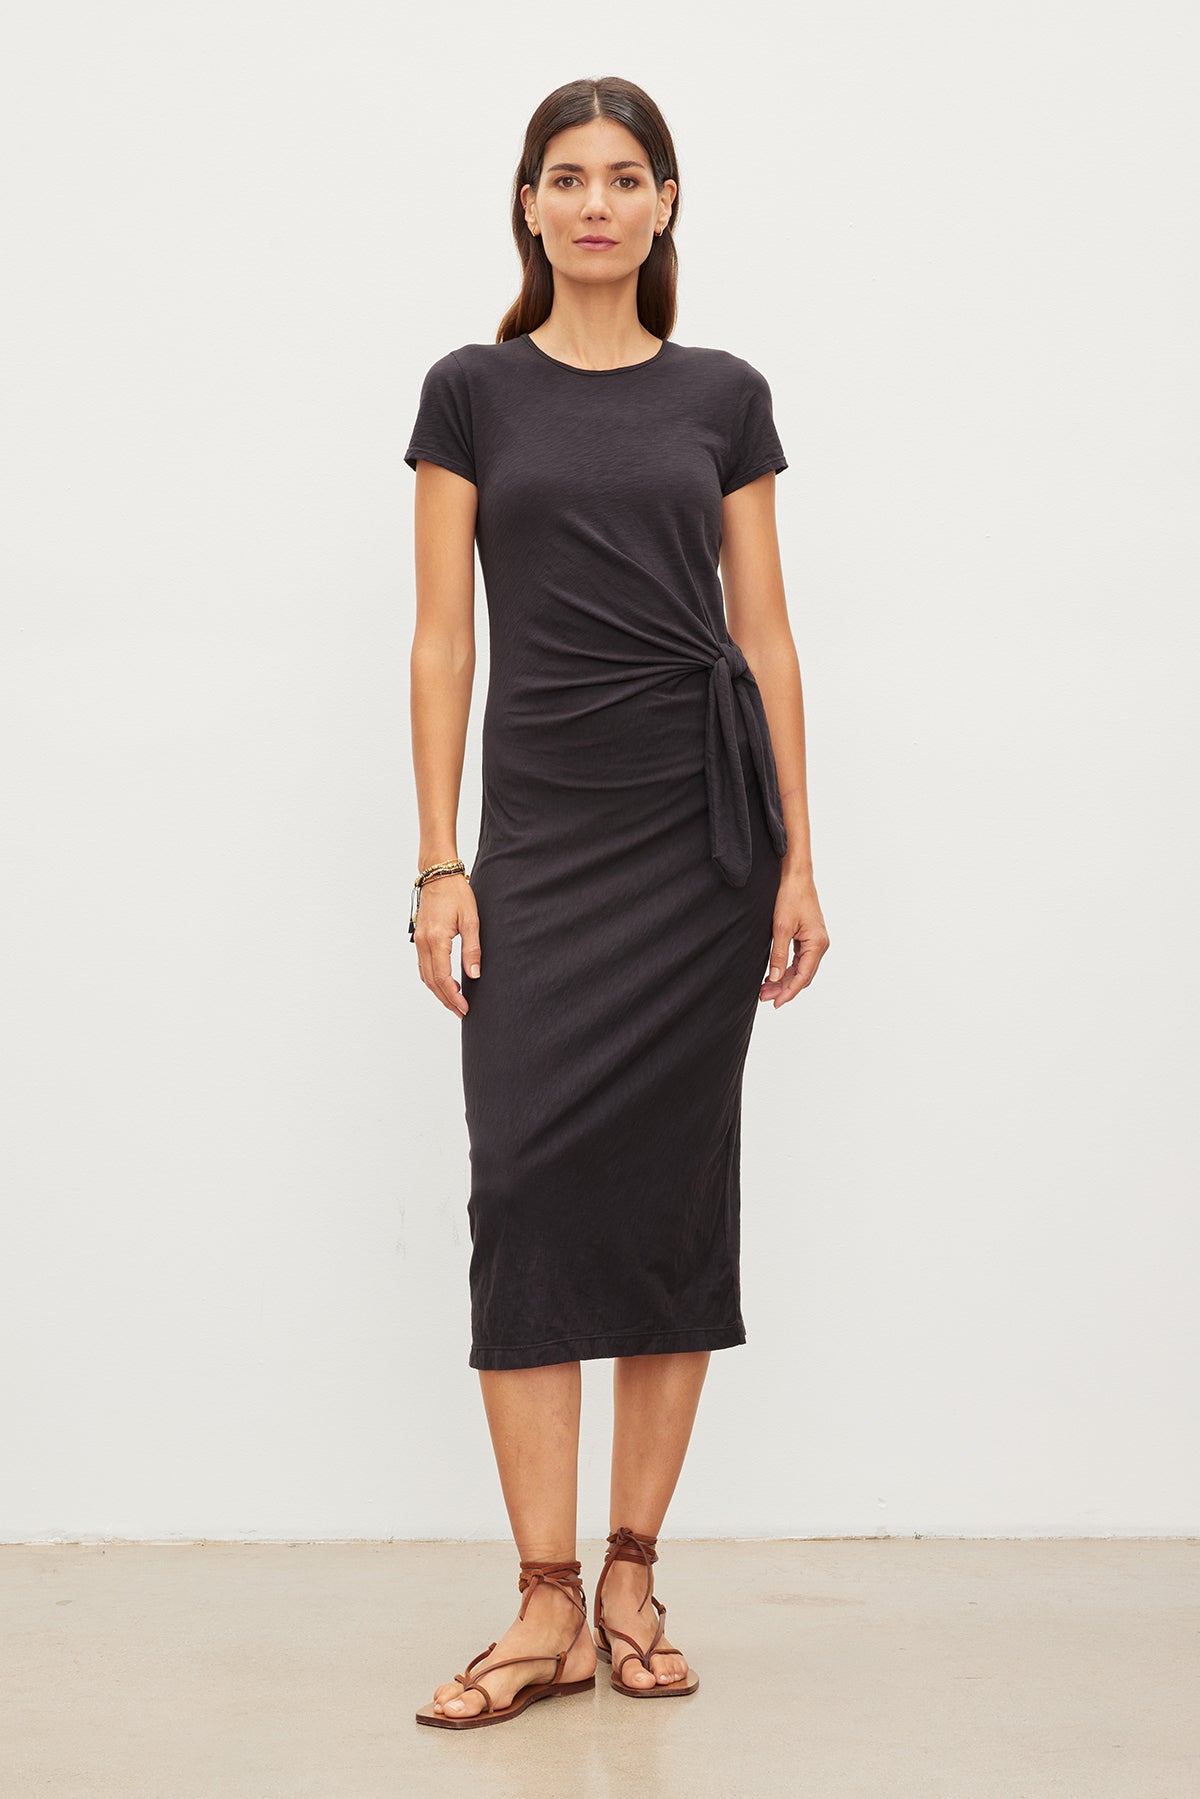 A woman wearing a Velvet by Graham & Spencer Darcy Cotton Slub Midi Dress and sandals.-35955695780033